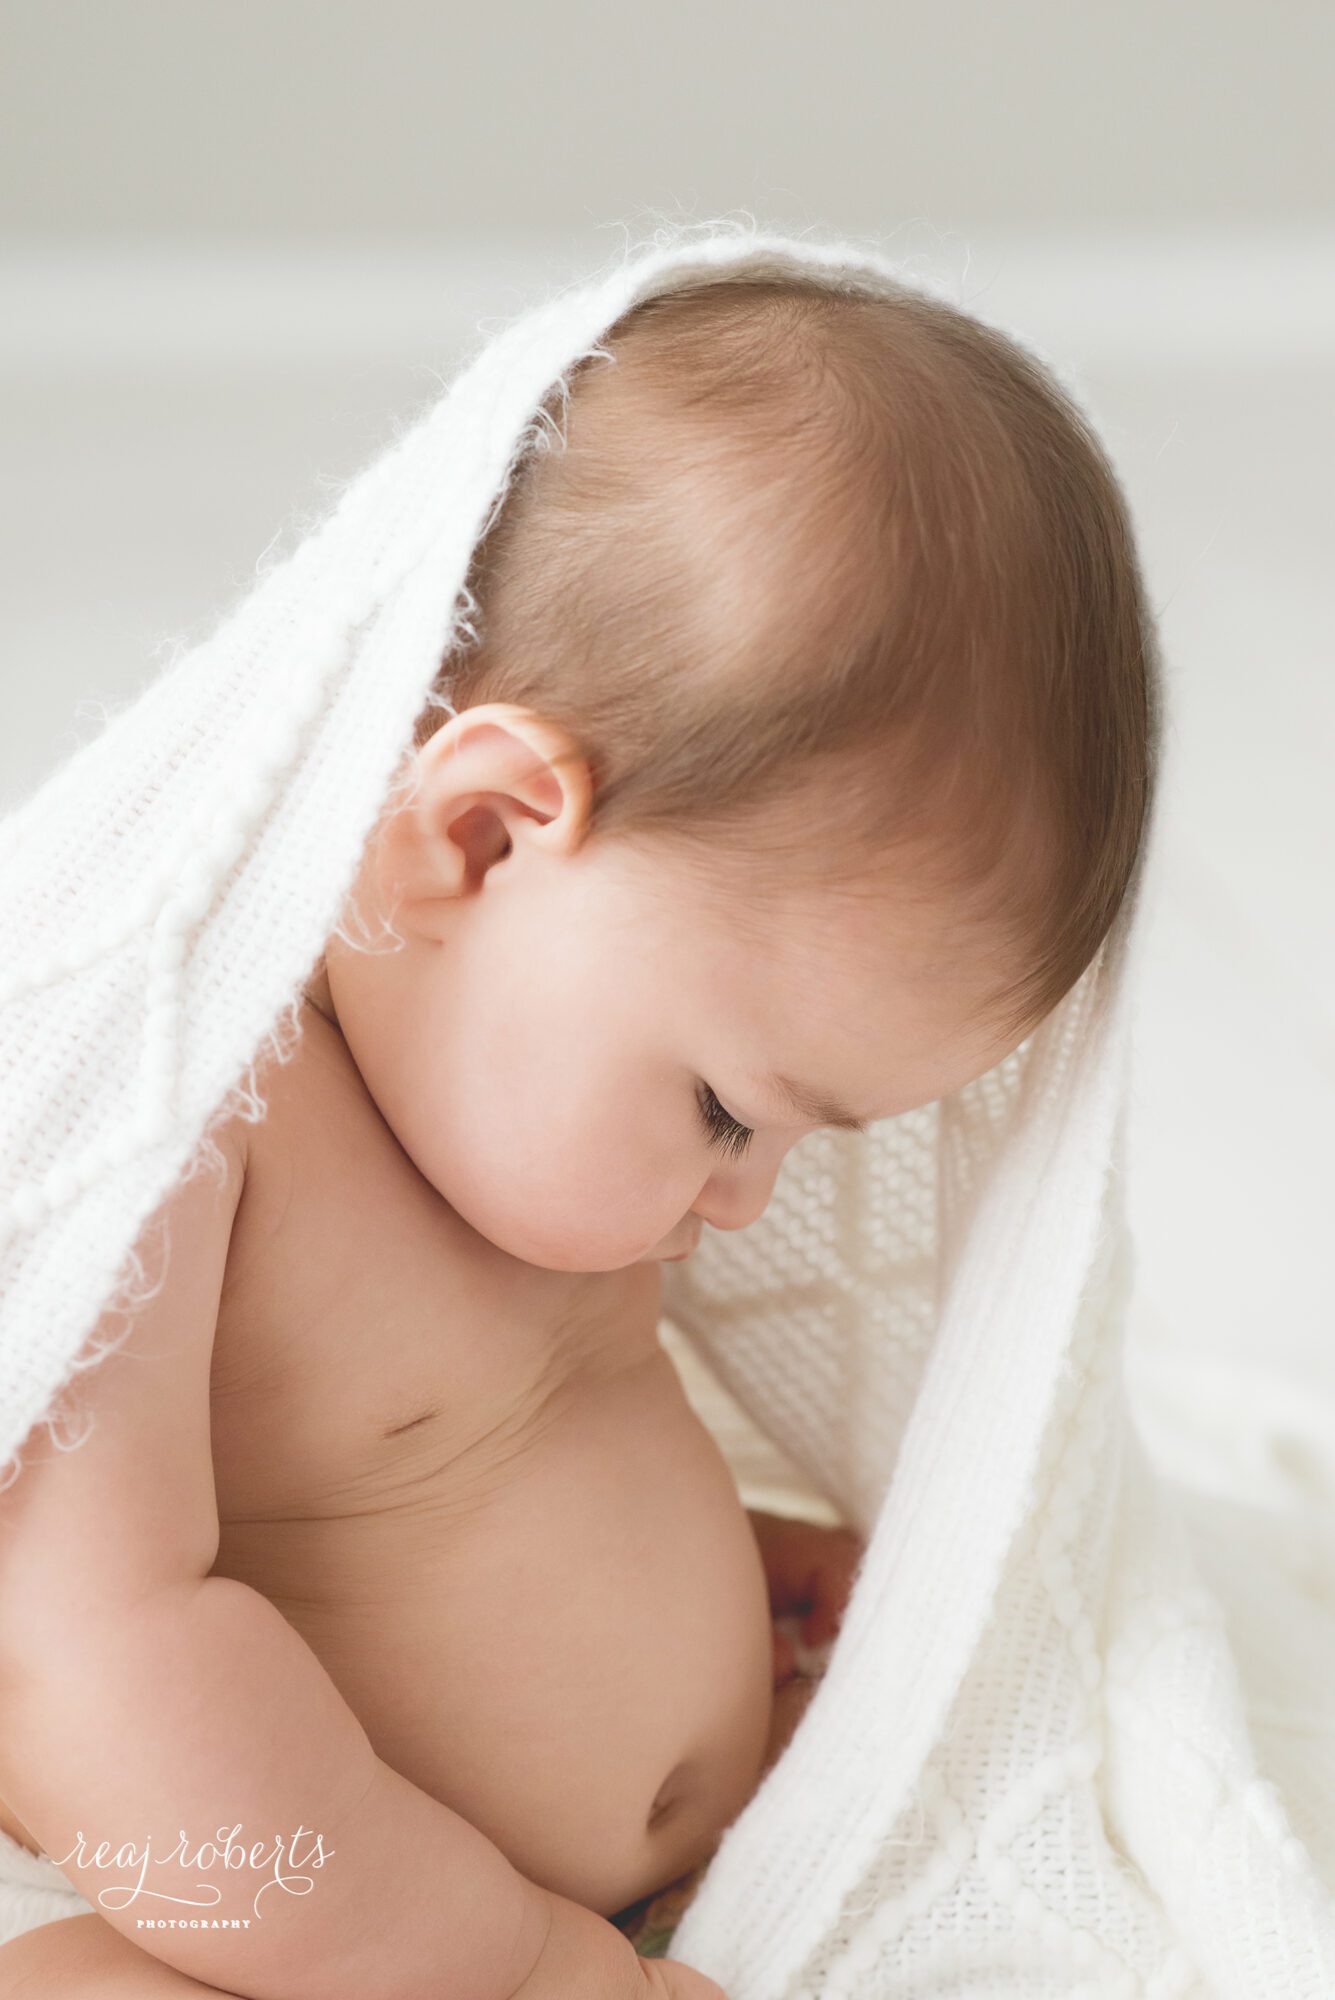 Baby with simple white blanket